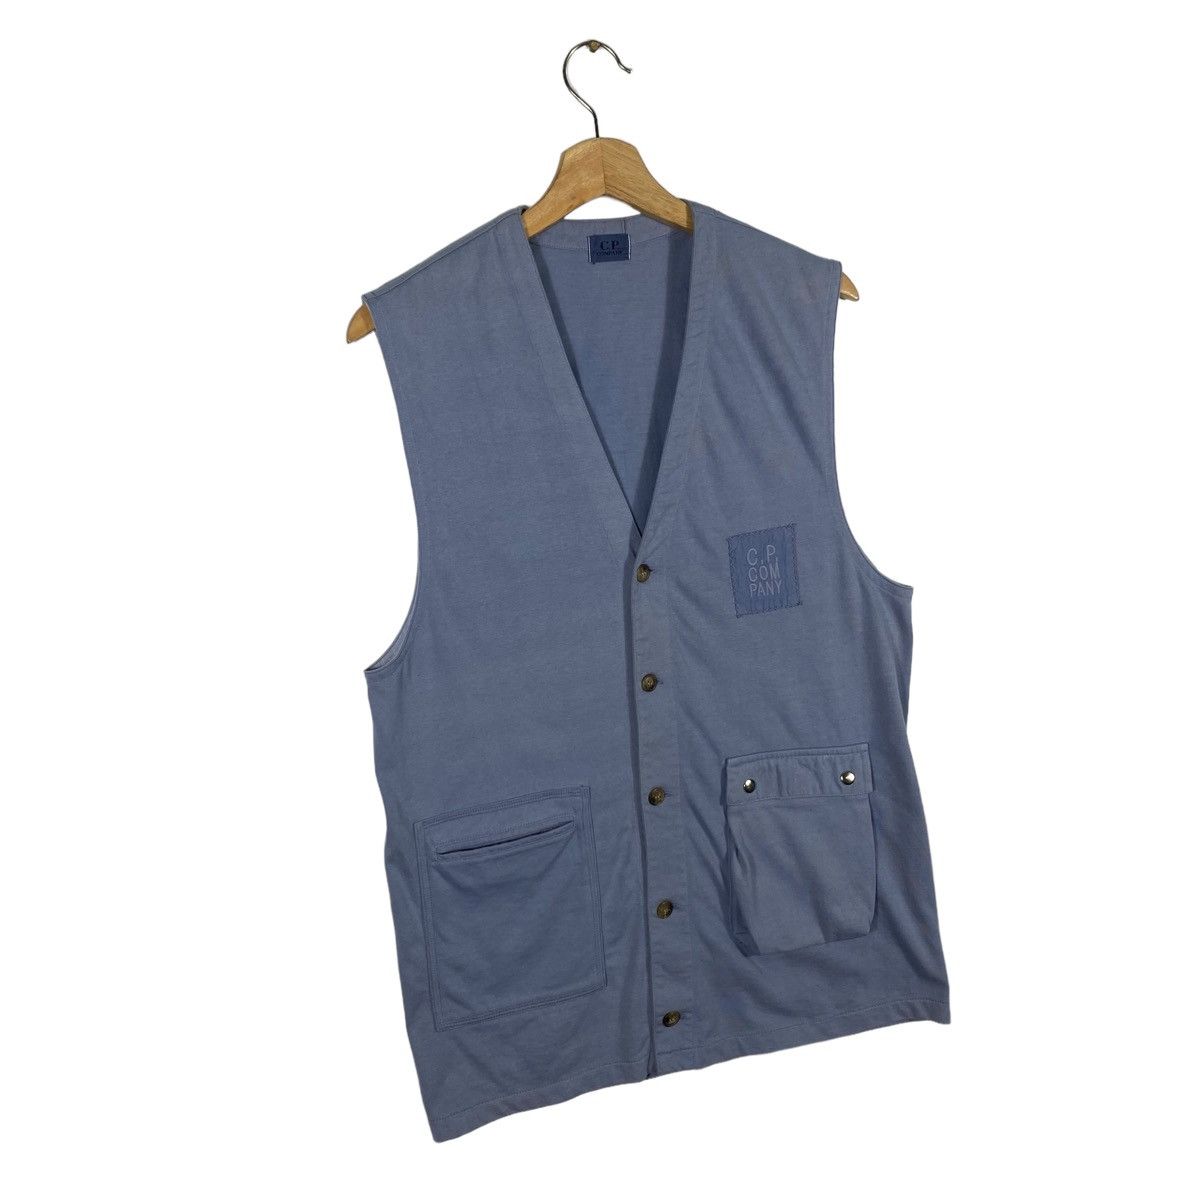 Vintage 90s Cp Company Ideas From Massimo Osti Vest - 3